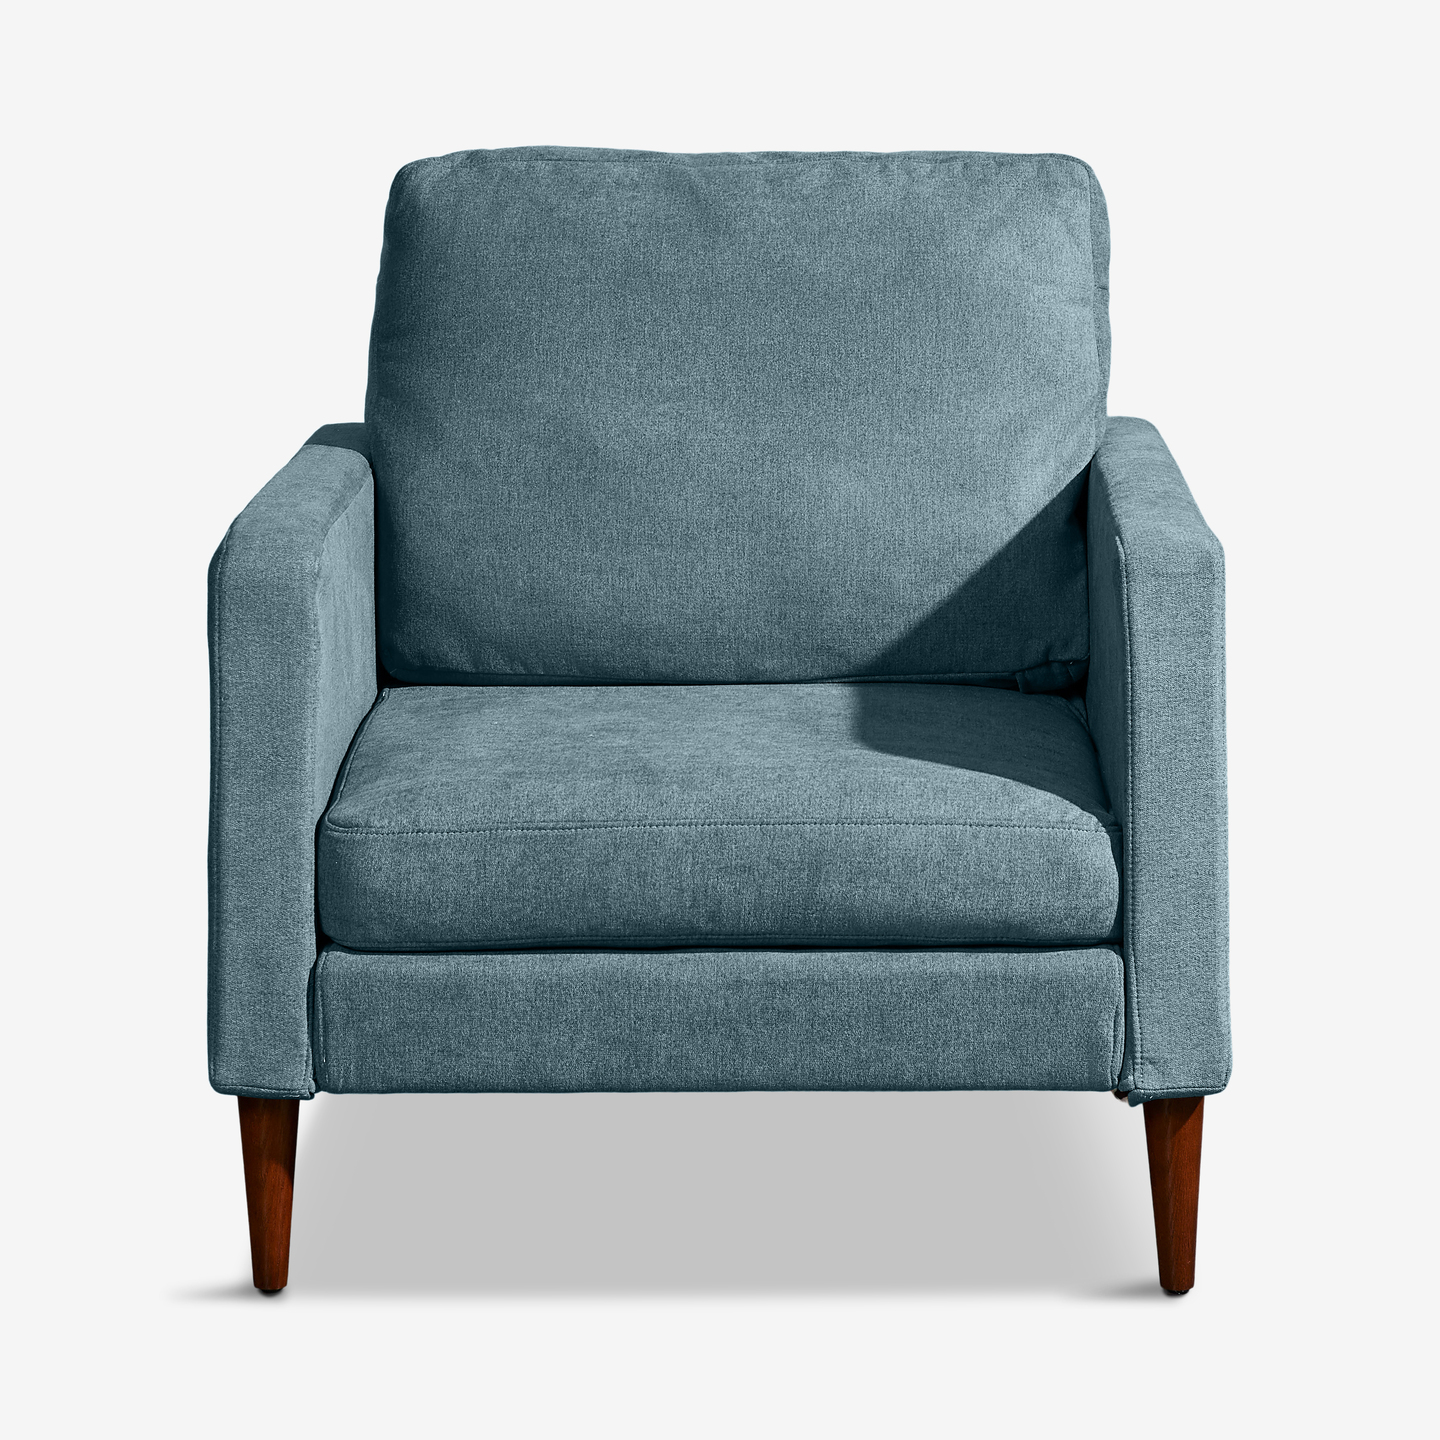 90_Campaign-Chair-Meridian-Blue_Flat-Front (2020)